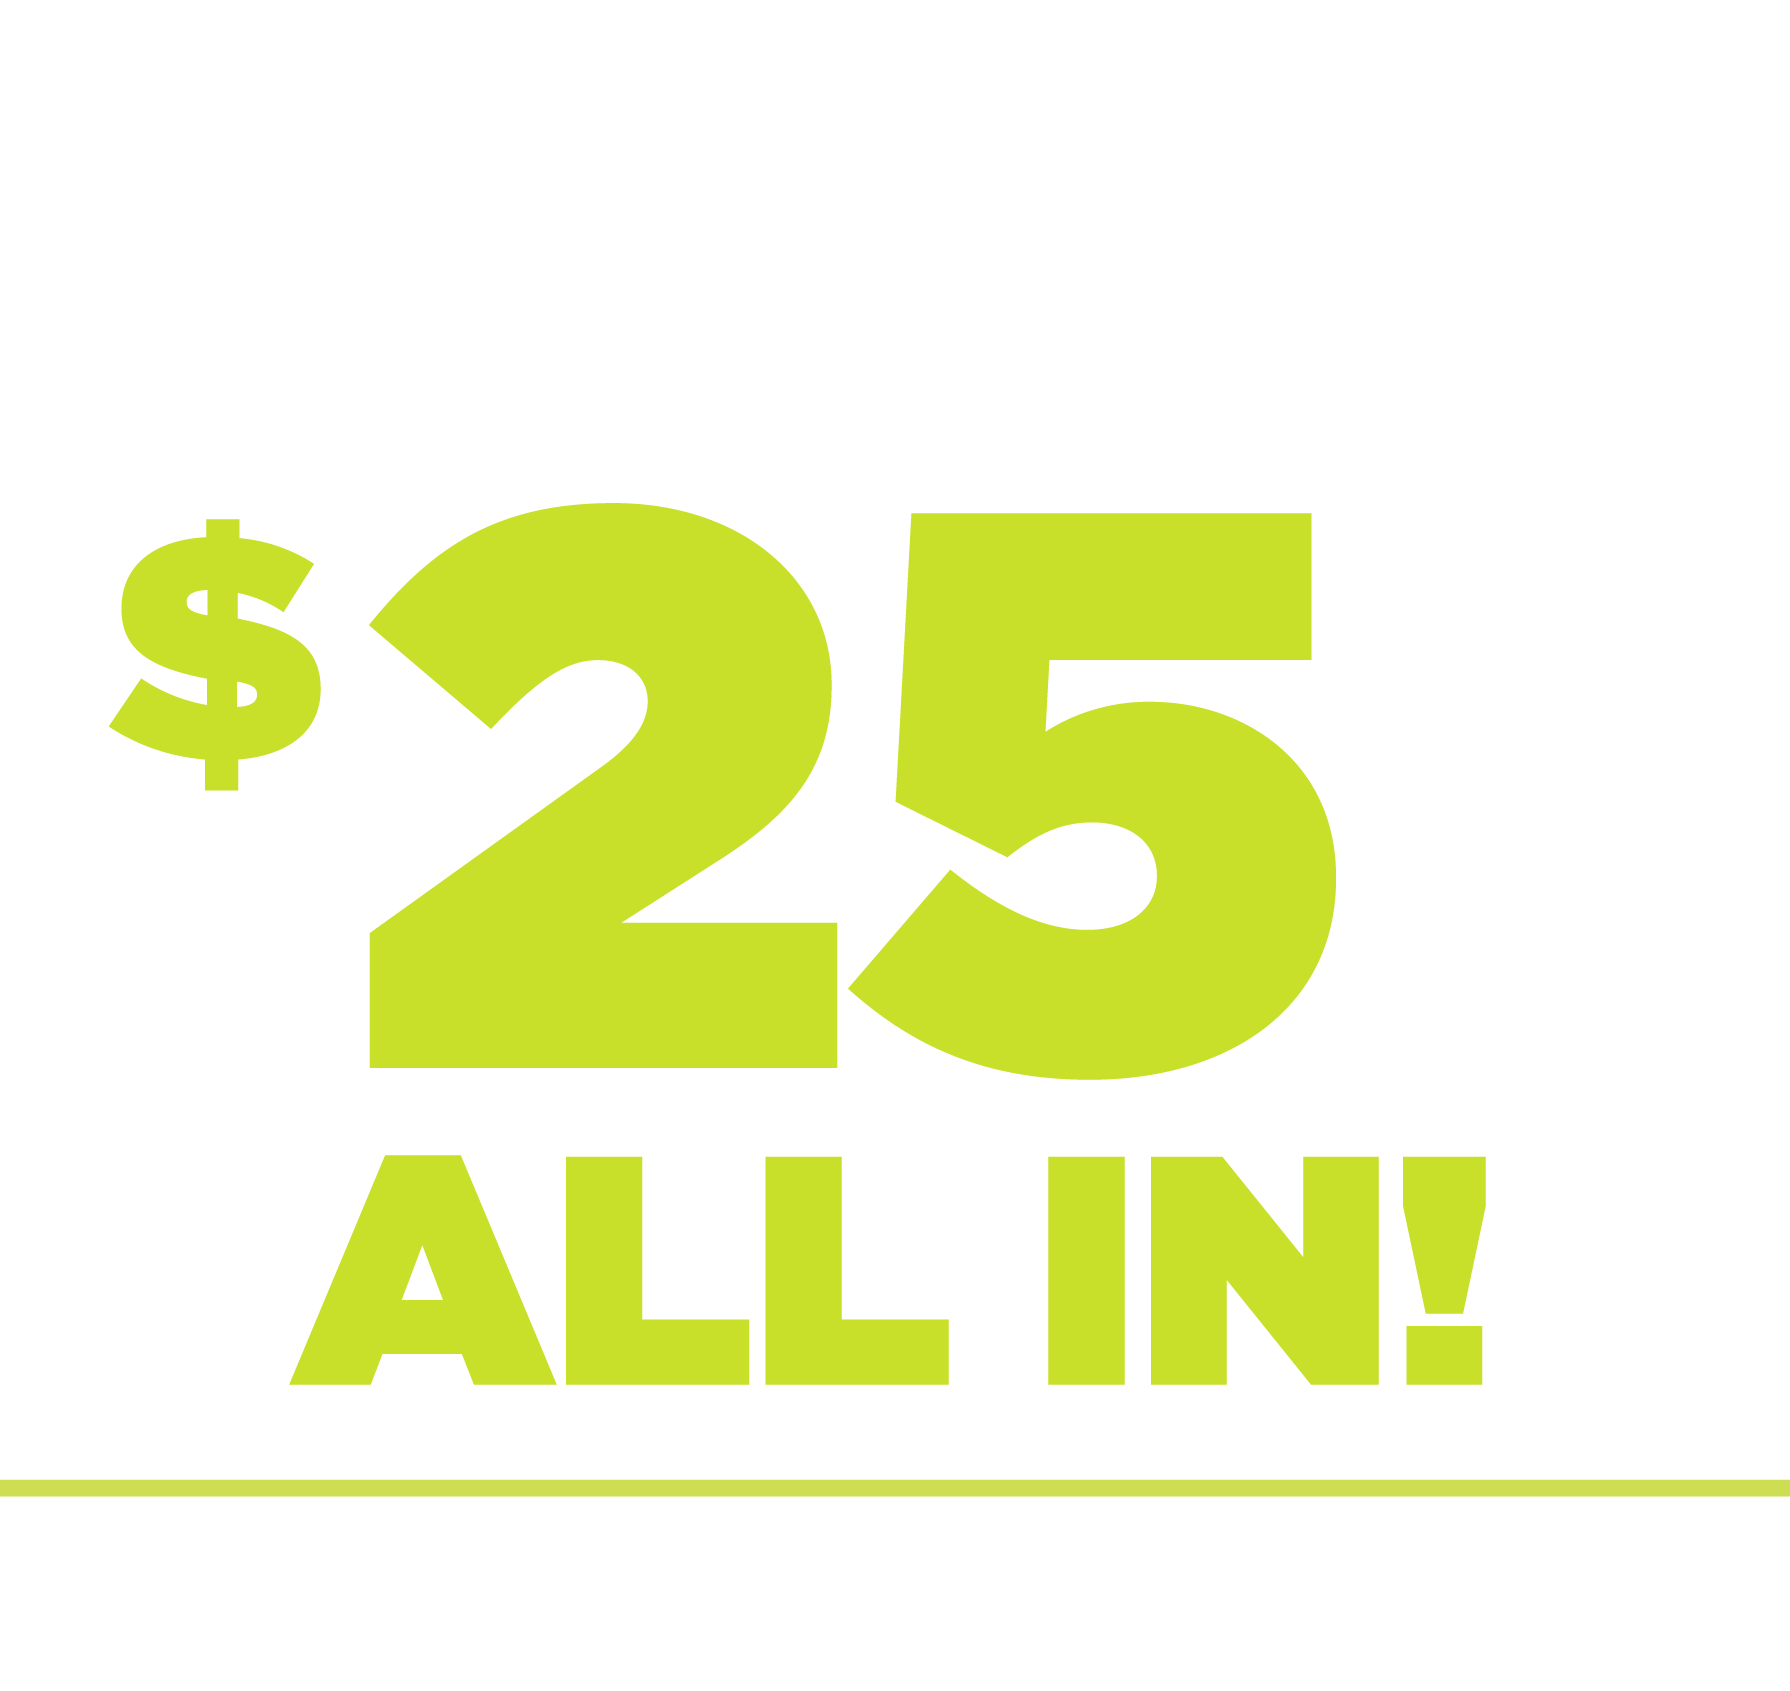 Internet starting at $25 All in! 2-year price lock.